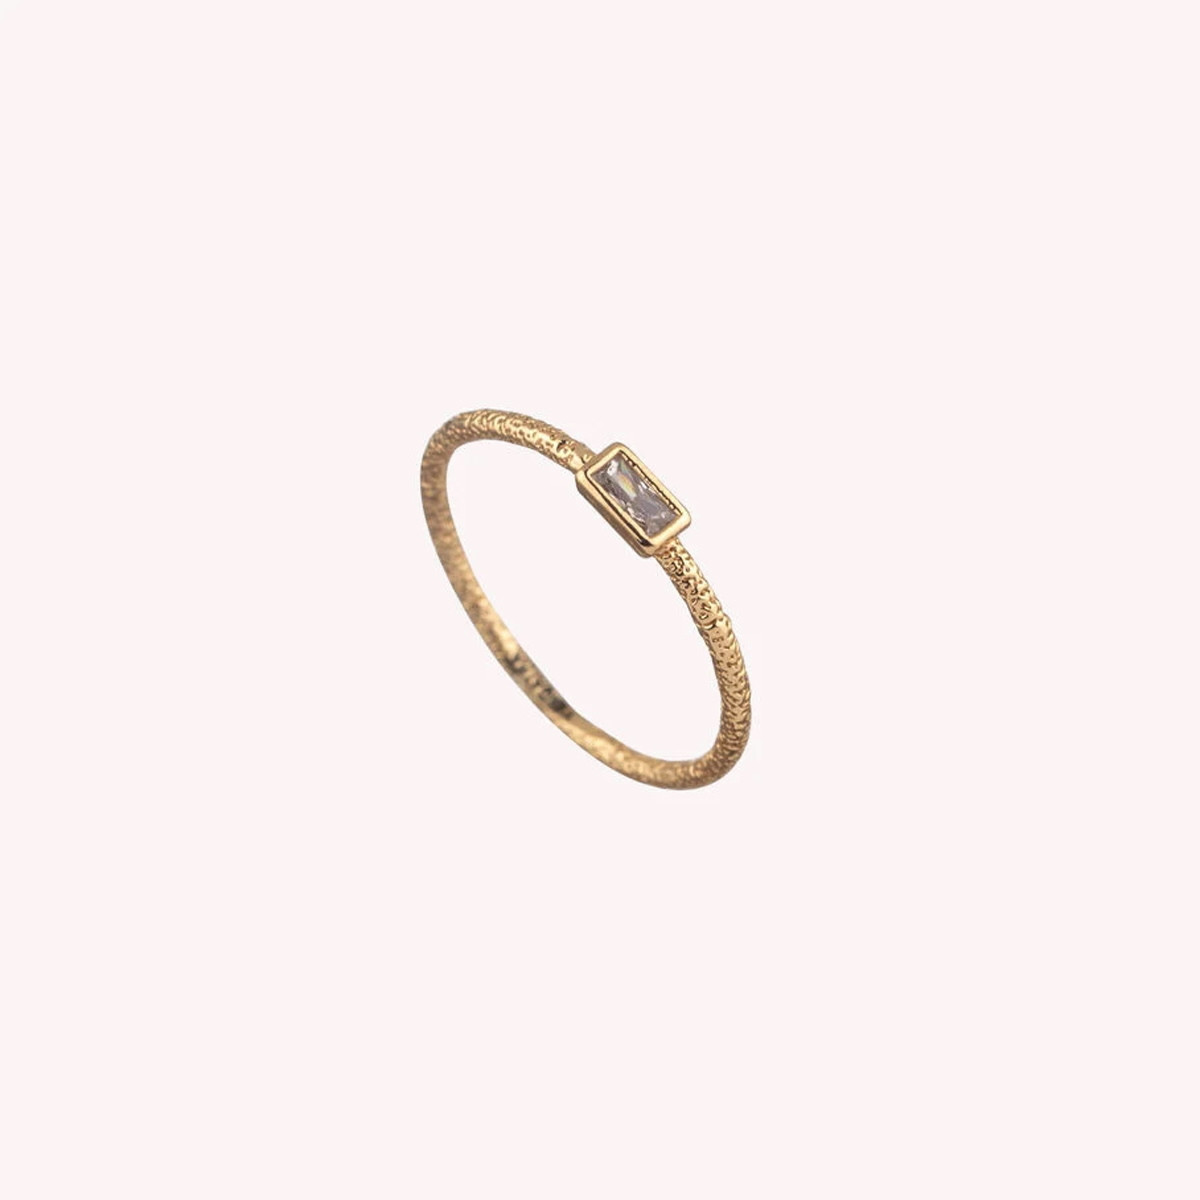 FINE CLEOPATR CRYSTAL / GOLD-PLATED RING